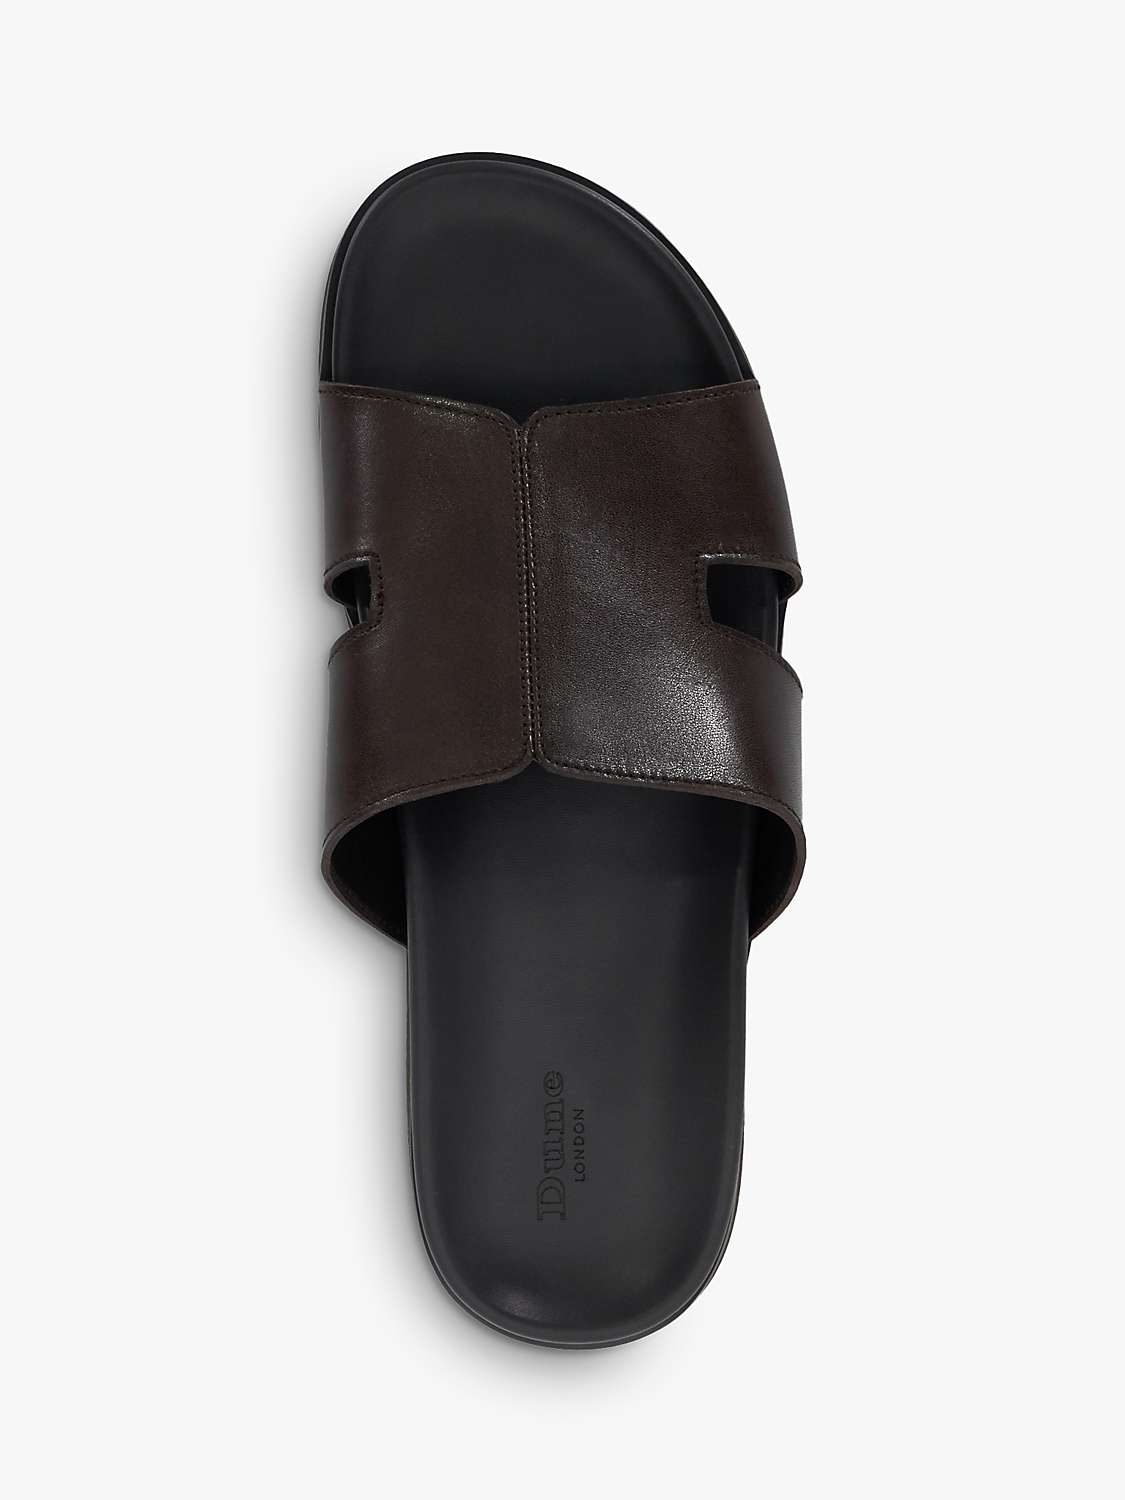 Buy Dune Insight Cutout Leather Sandals, Brown Online at johnlewis.com